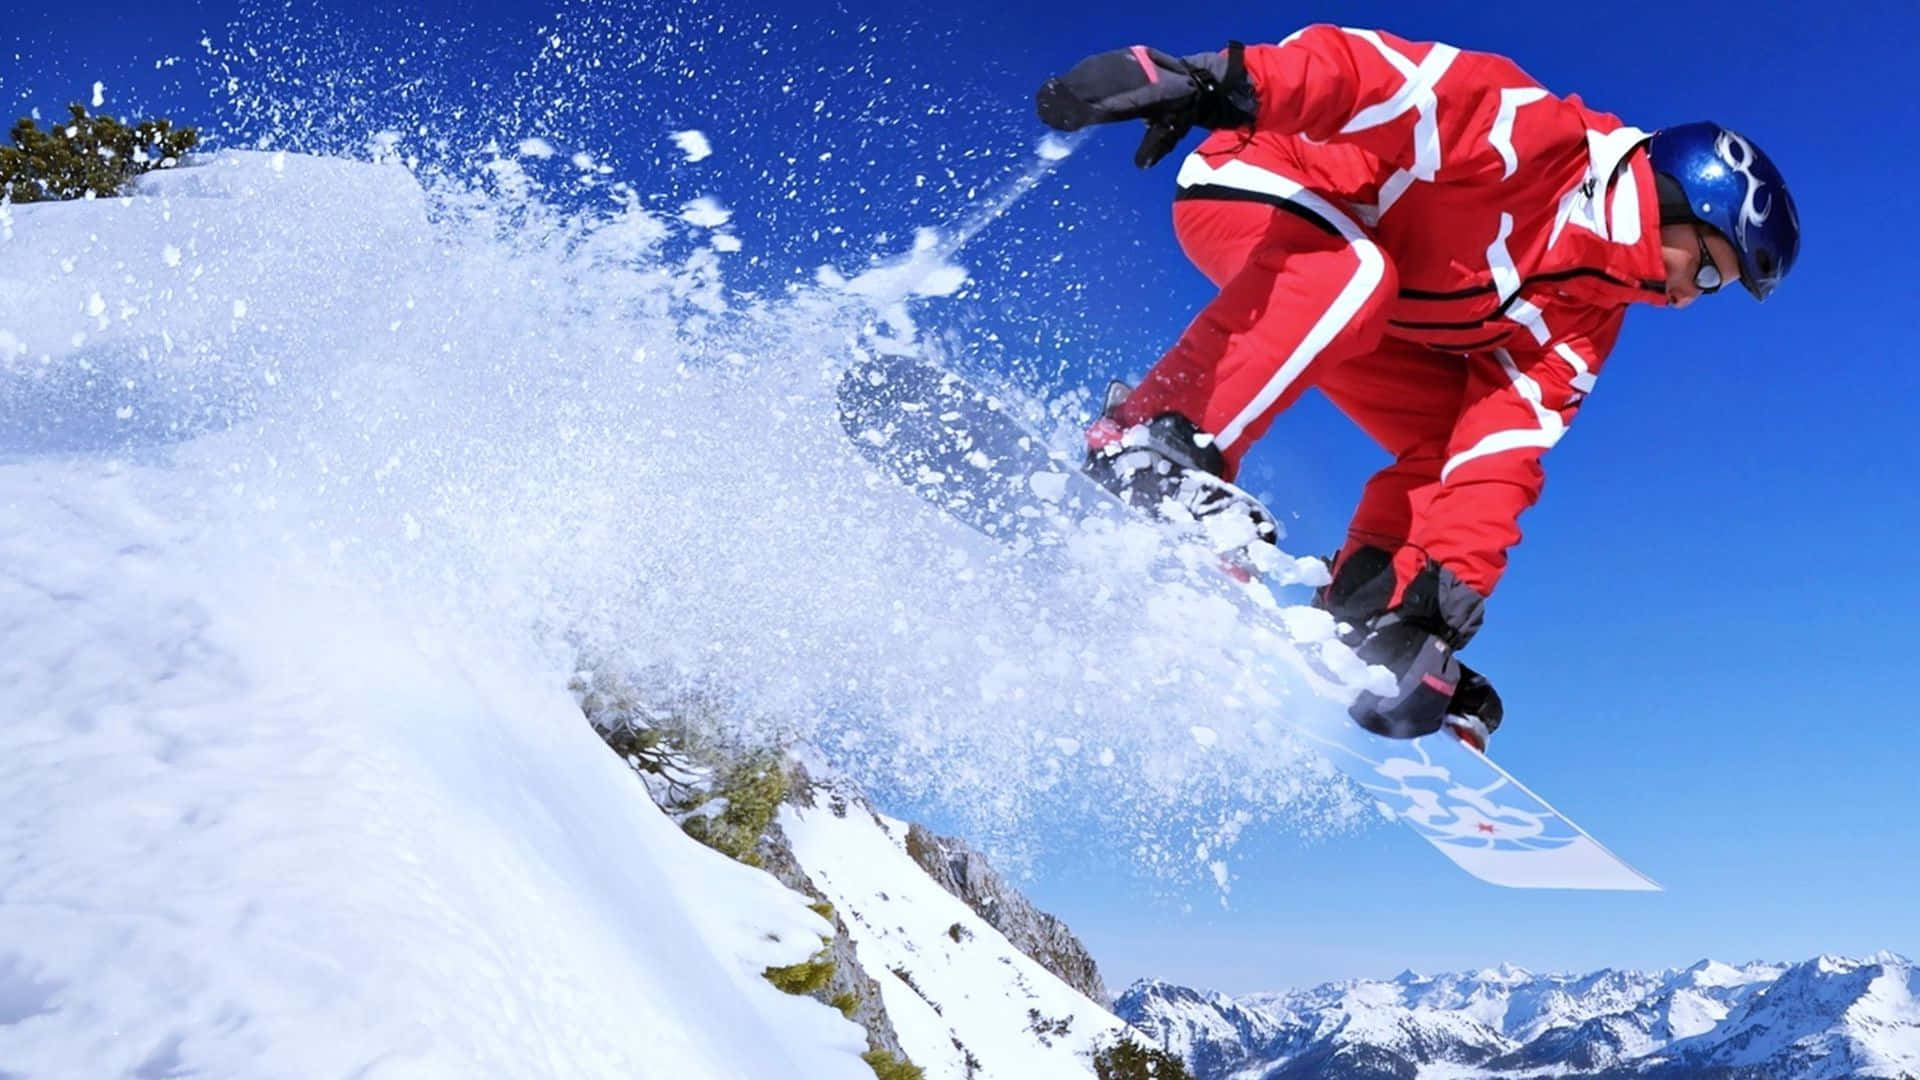 Captivating Moment Of A Skier In Action Wallpaper